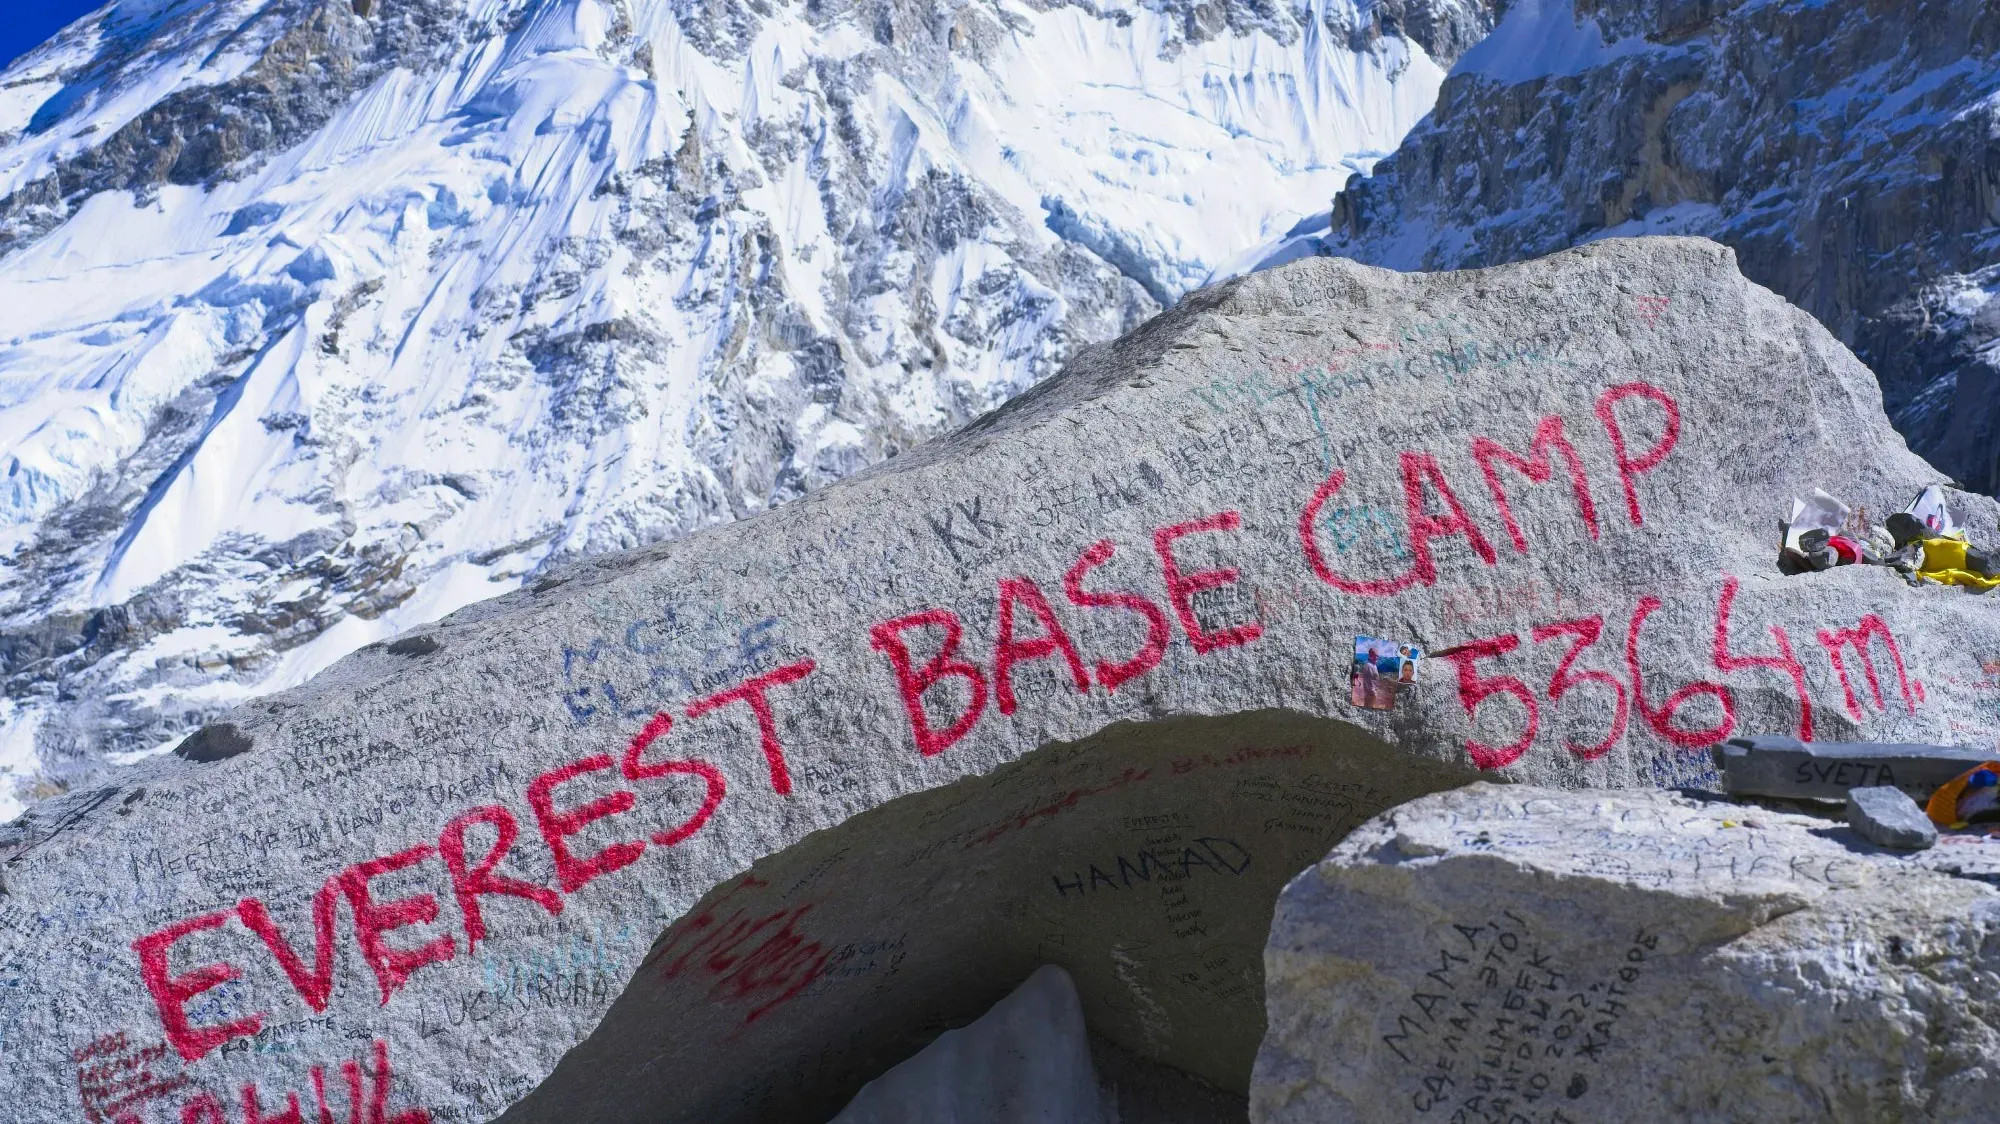 Rock with red spray paint saying "Everest Base Camp 5364m."